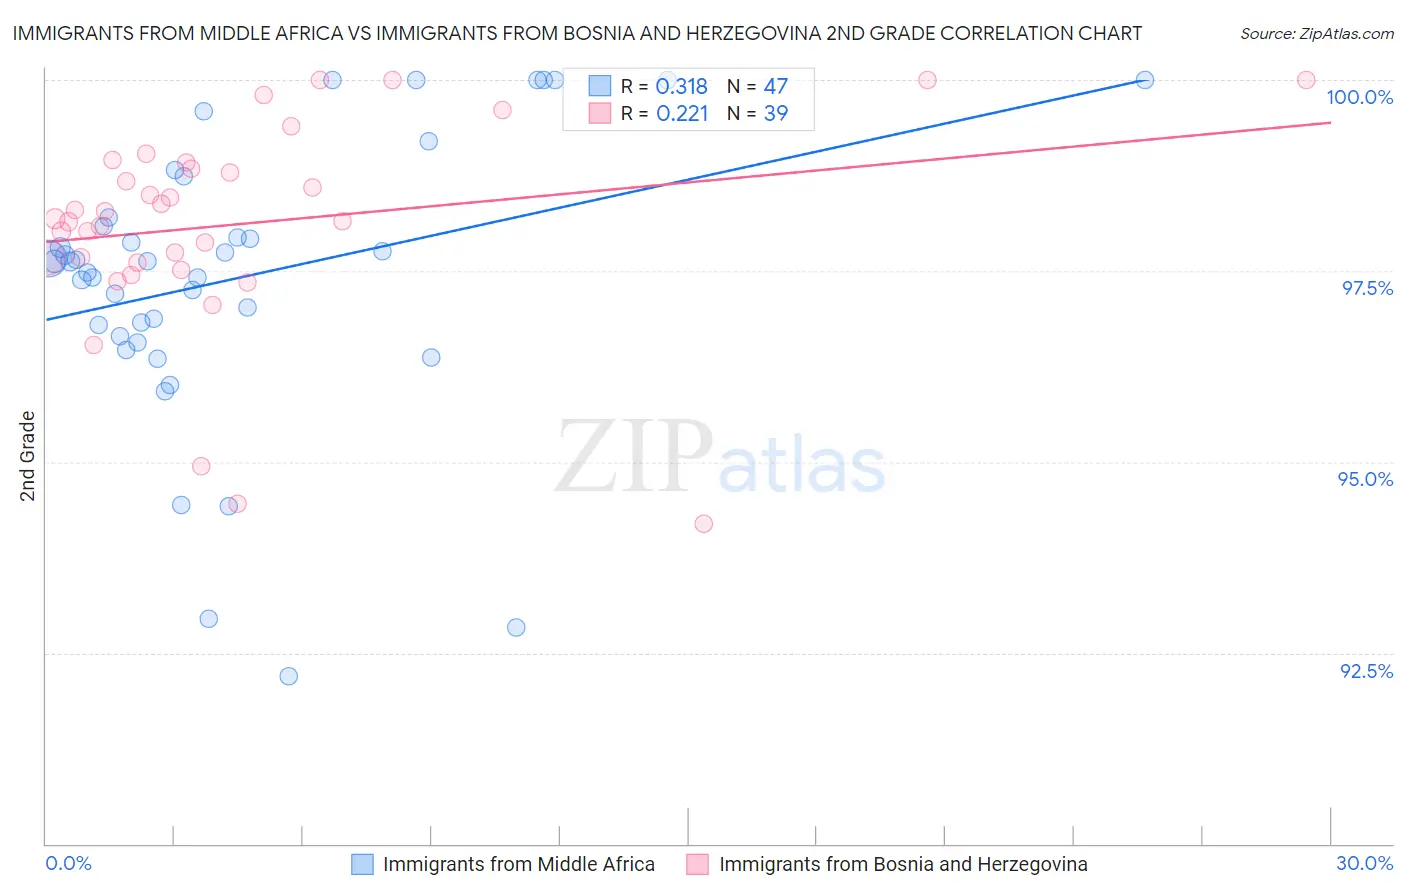 Immigrants from Middle Africa vs Immigrants from Bosnia and Herzegovina 2nd Grade